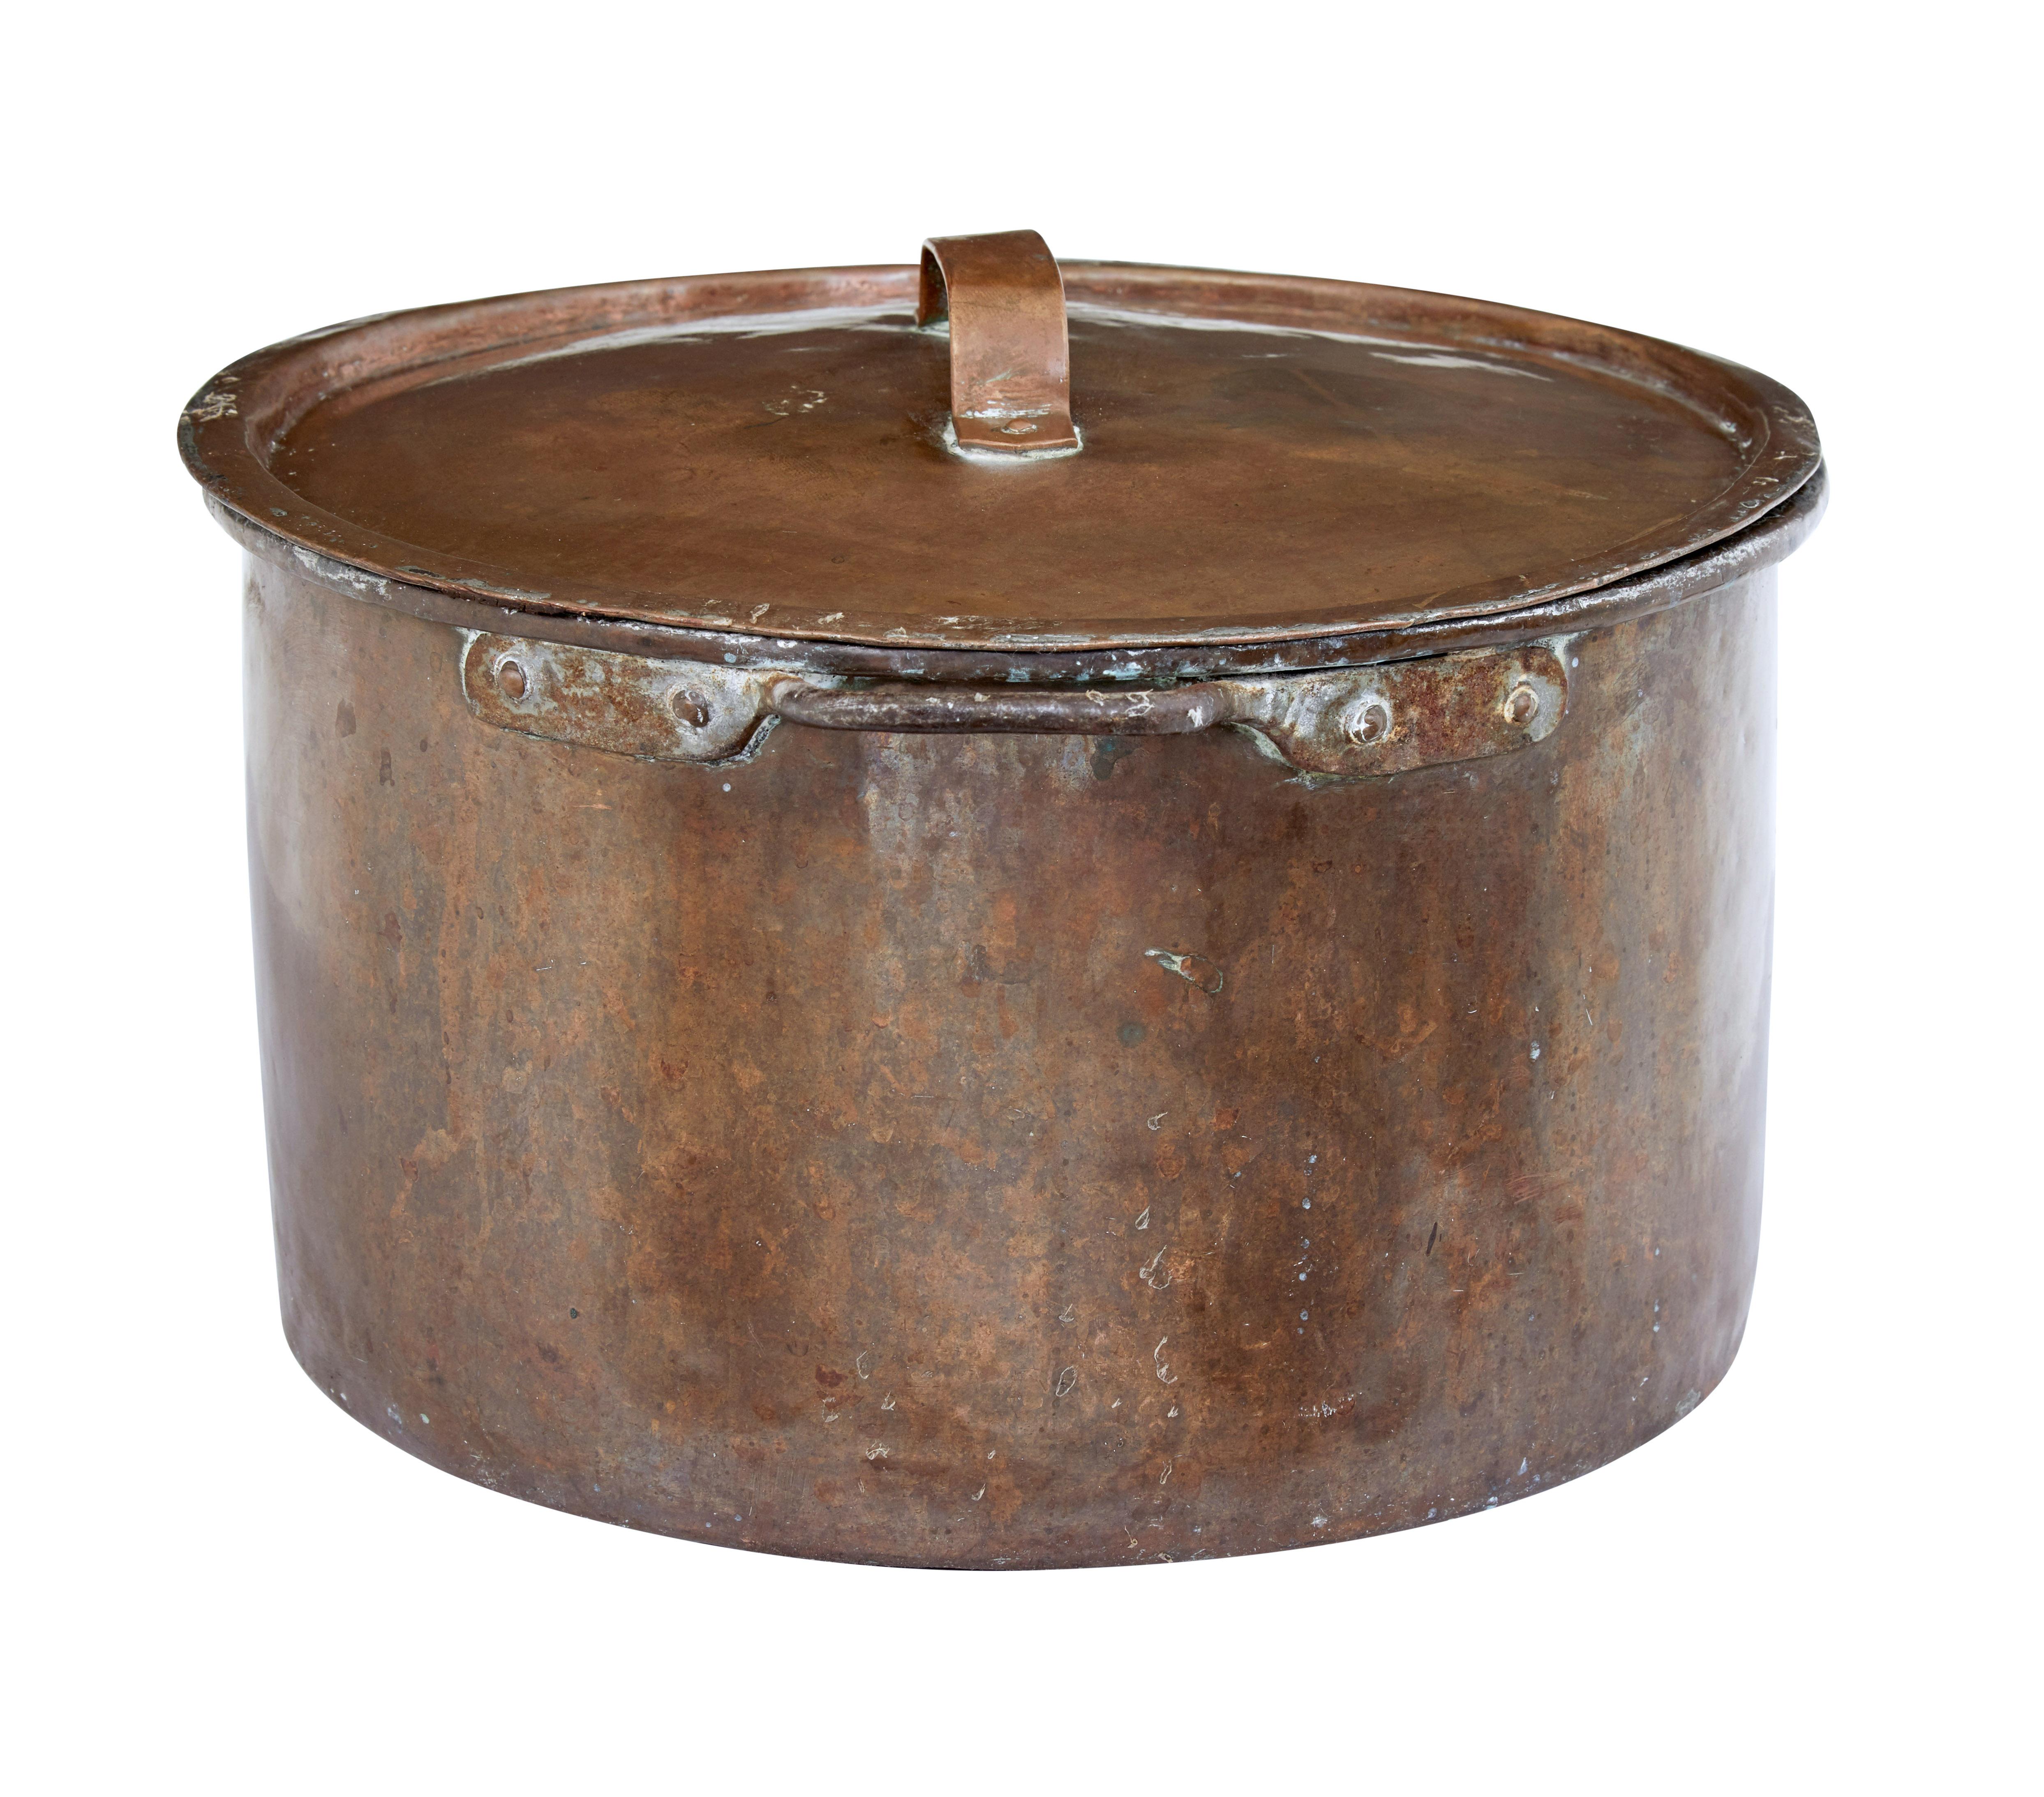 19th century copper cooking pot with lid, circa 1880.

Good quality cooking pot complete with original lid. Fitted with handles. Ideal for use as a log basket or kitchenalia display.

Expected surface marks and wear.